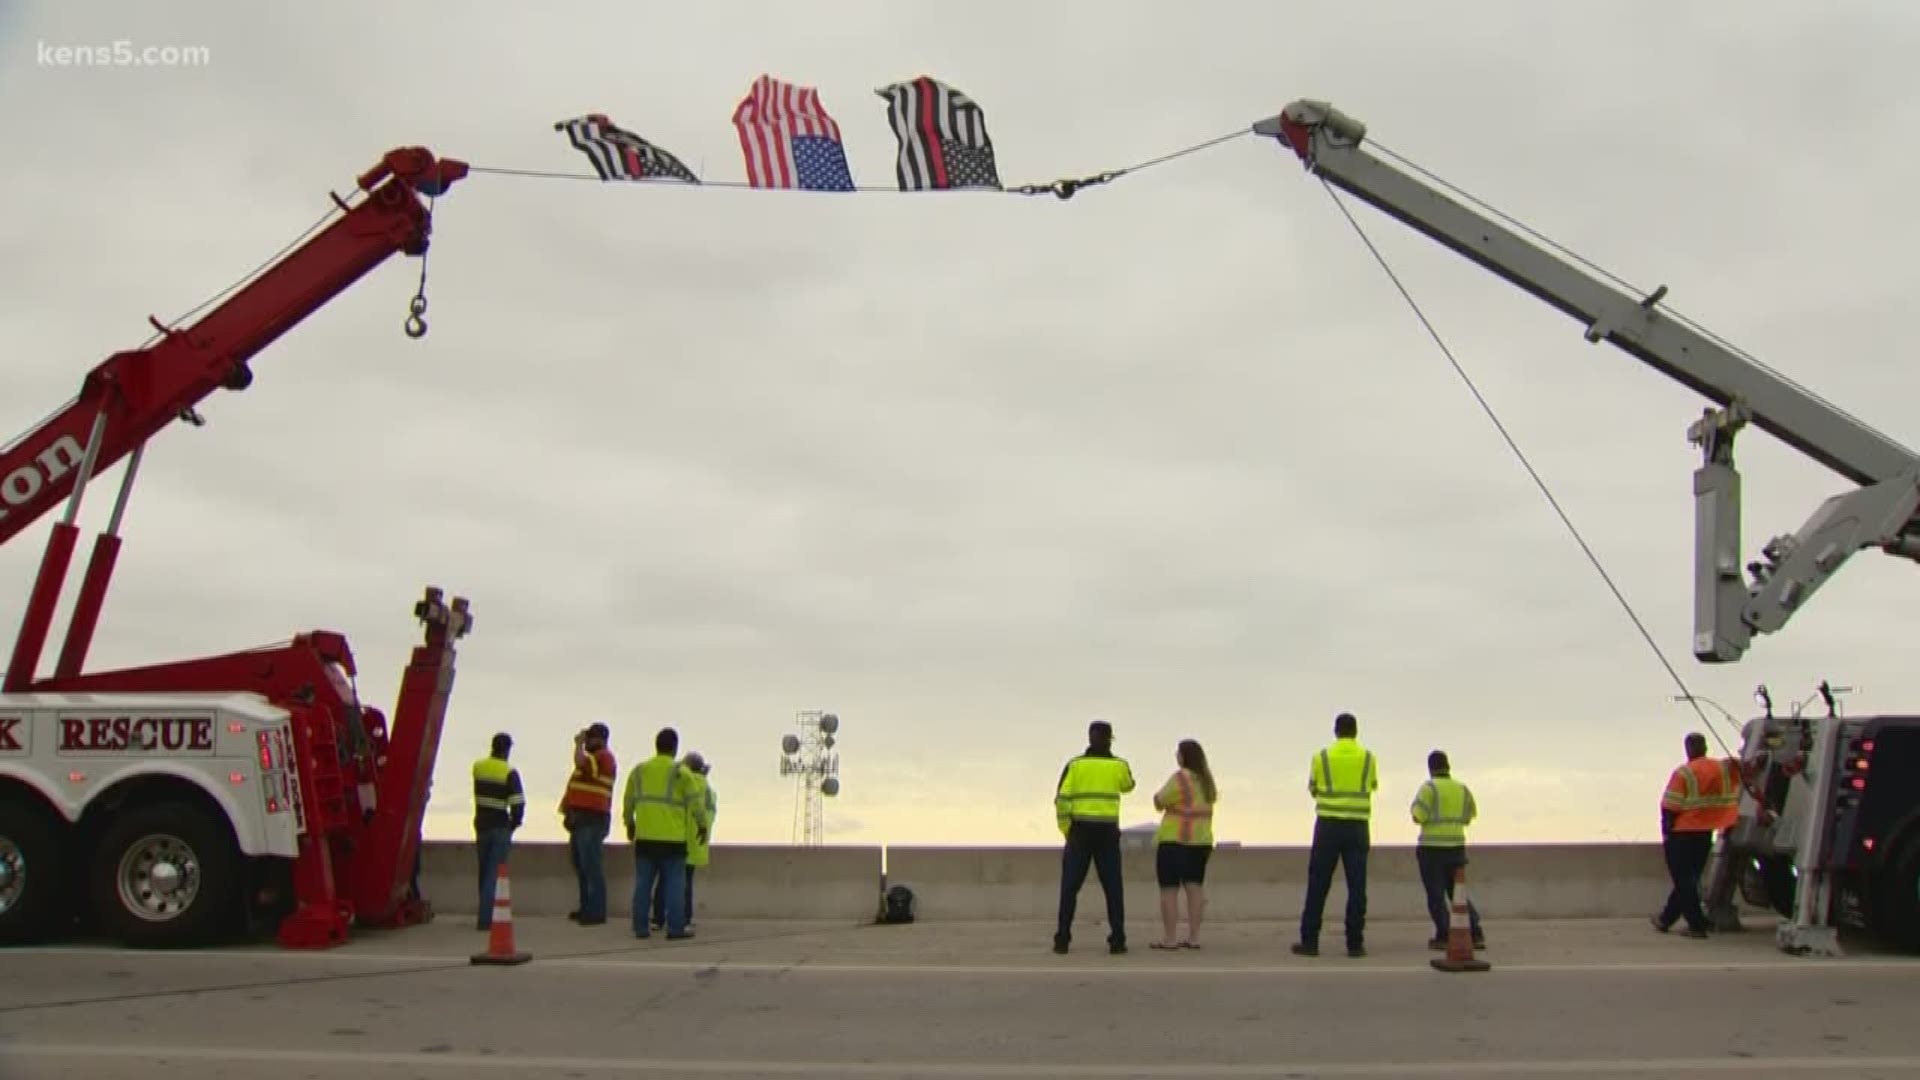 As the family, friends and colleagues of Greg Garza made their way to his funeral, community members and first responders stopped on overpasses to say, 'Thank you.'